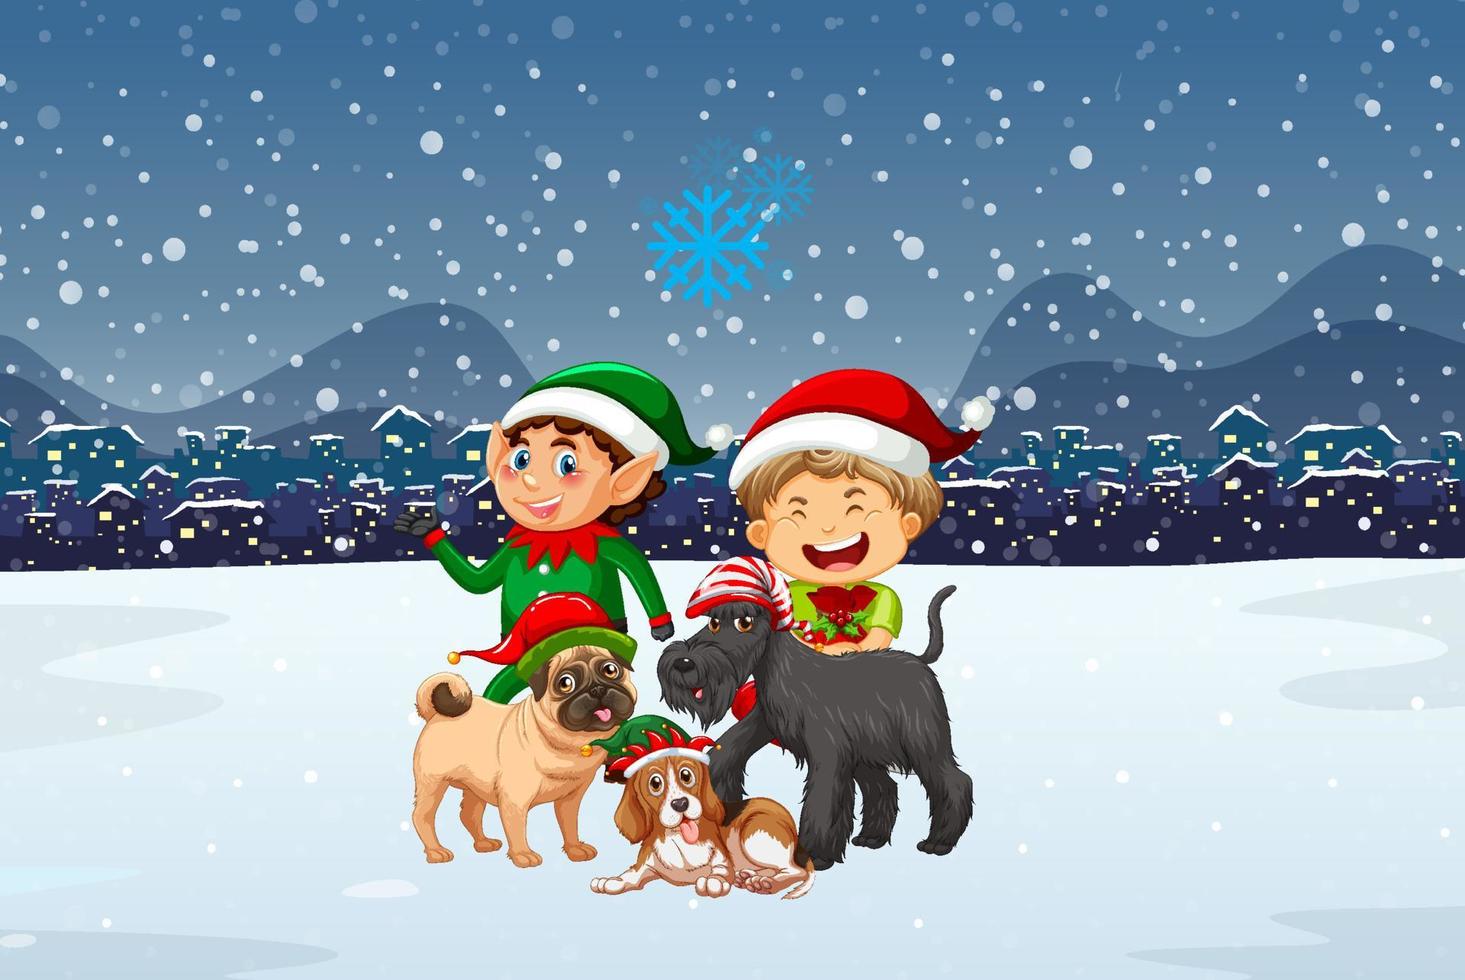 Snowy Christmas night with cartoon characters vector